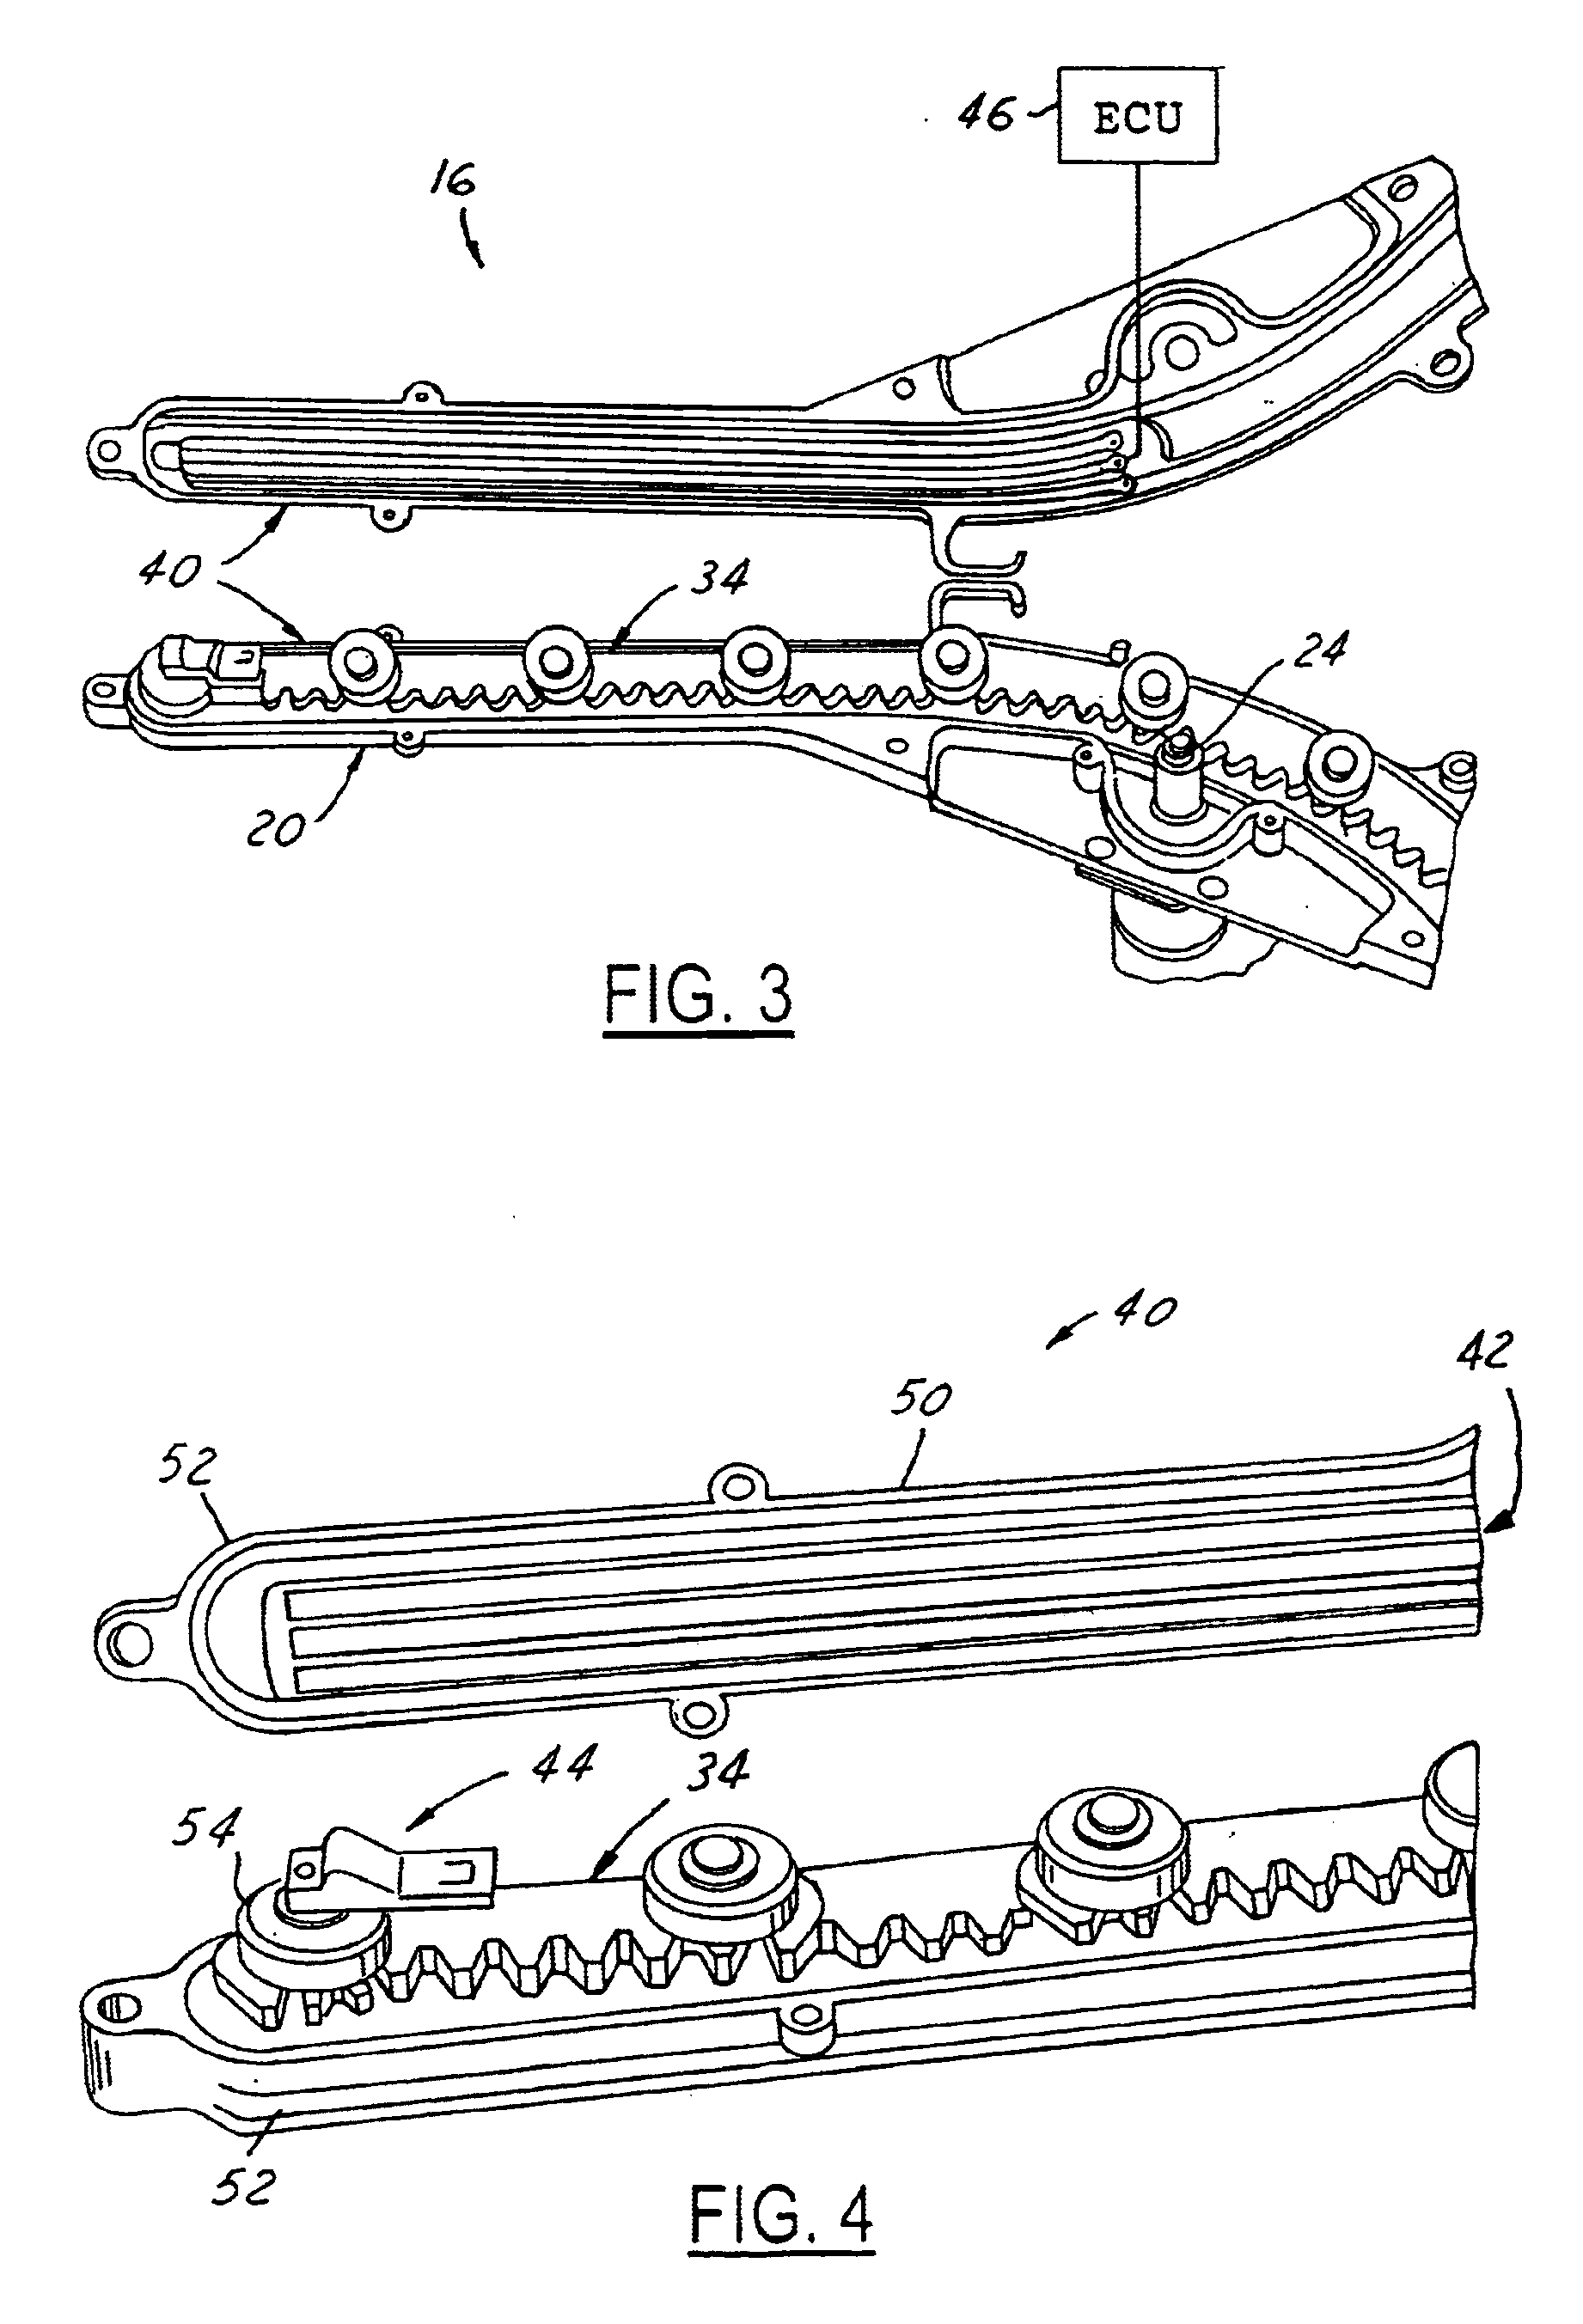 Electronic position sensor for power operated accessory